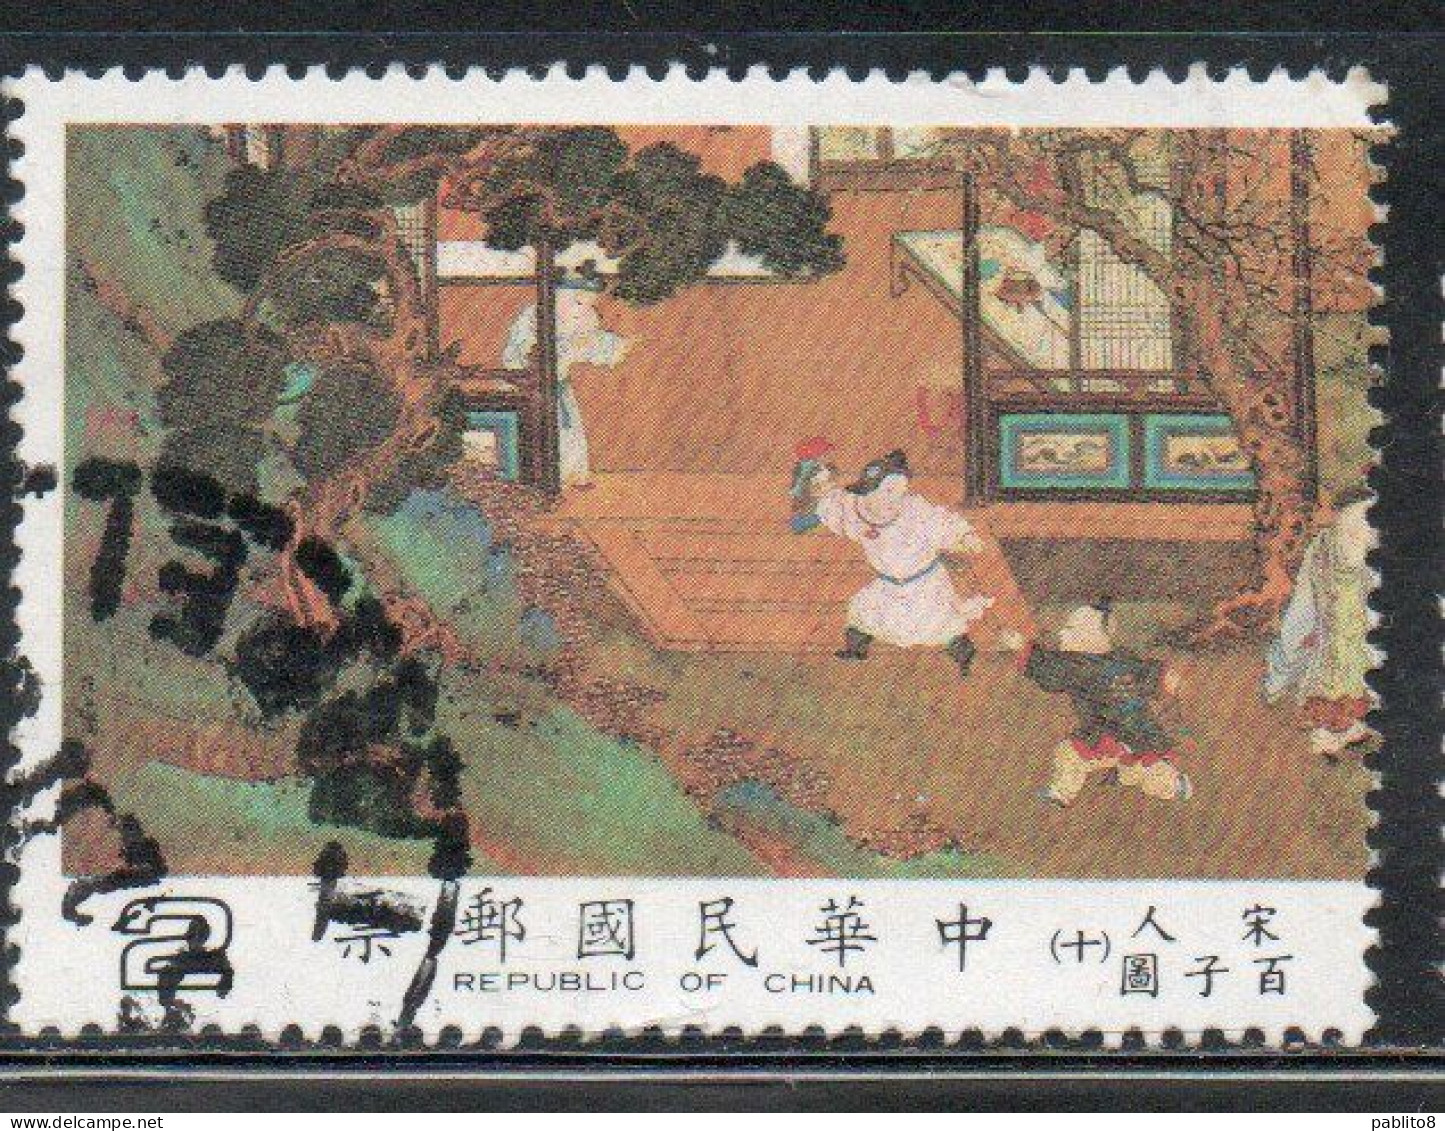 CHINA REPUBLIC CINA TAIWAN FORMOSA 1981 BOYS PLAYING GAMES 2$ USED USATO OBLITERE' - Used Stamps